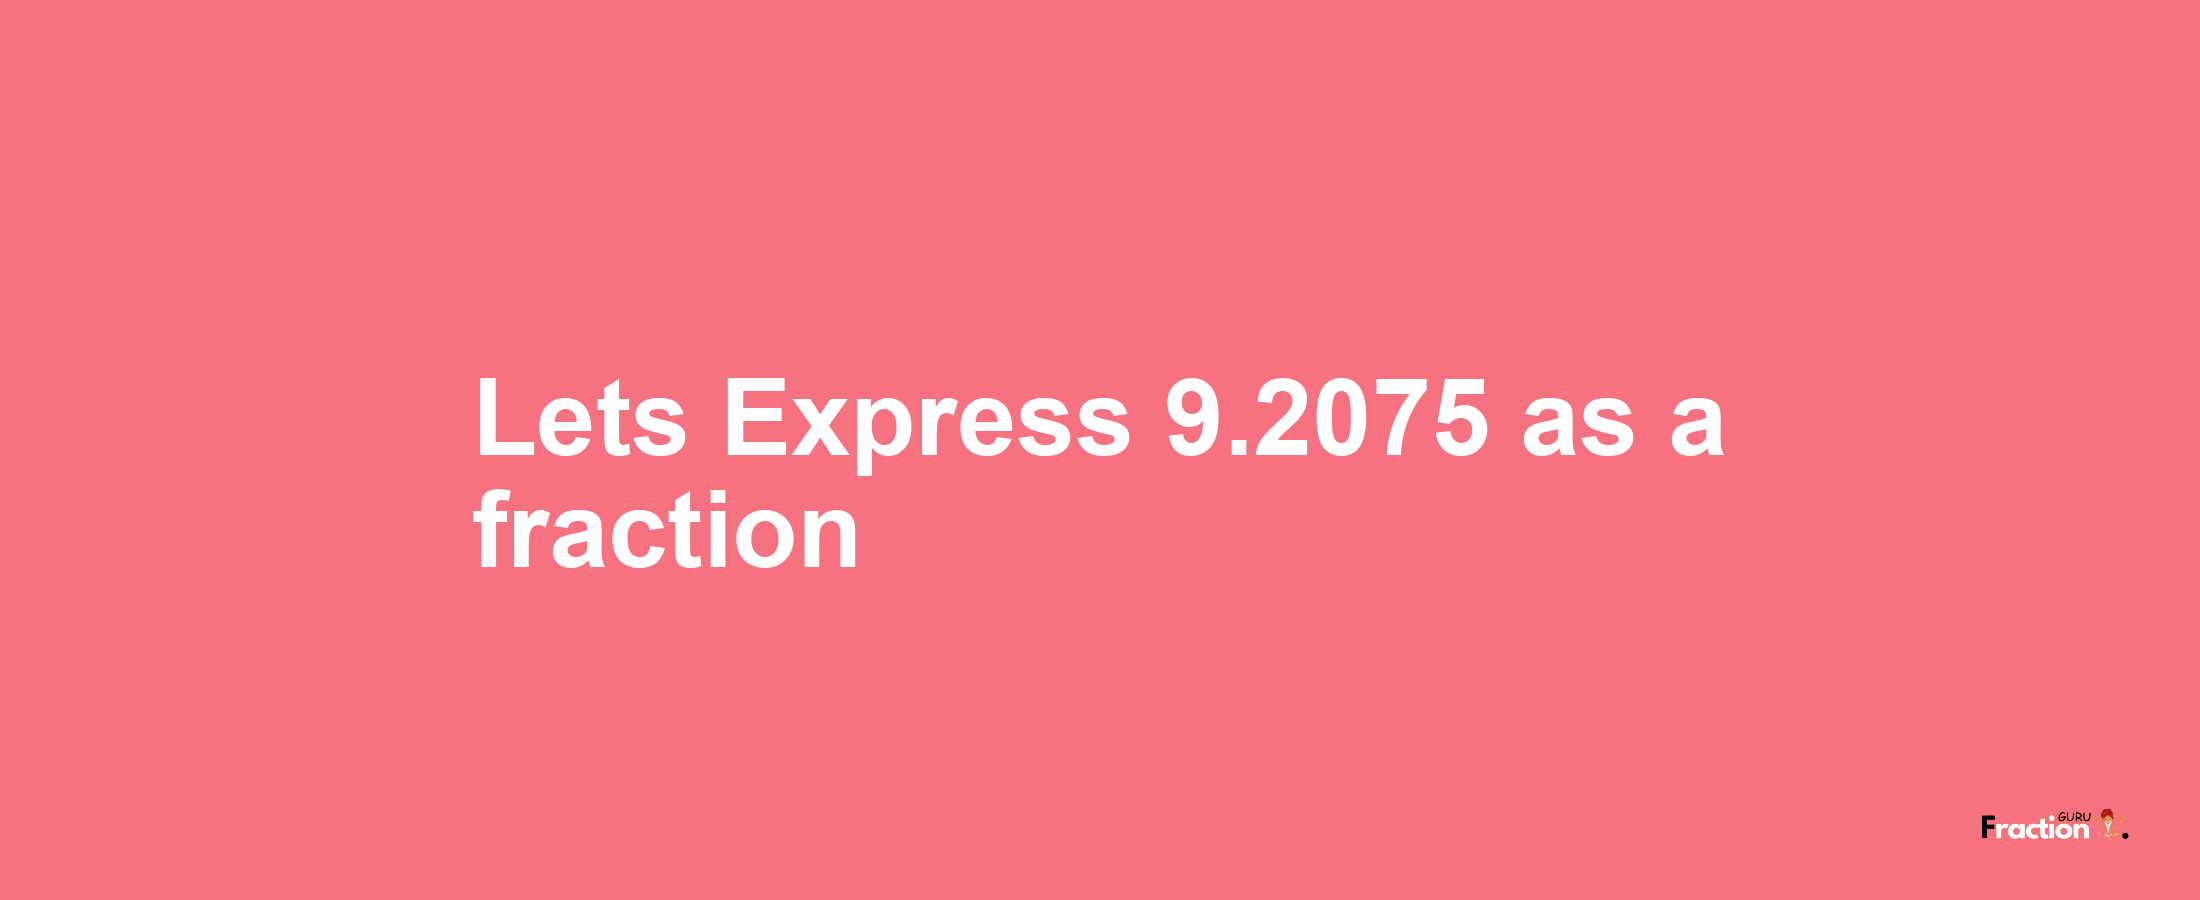 Lets Express 9.2075 as afraction